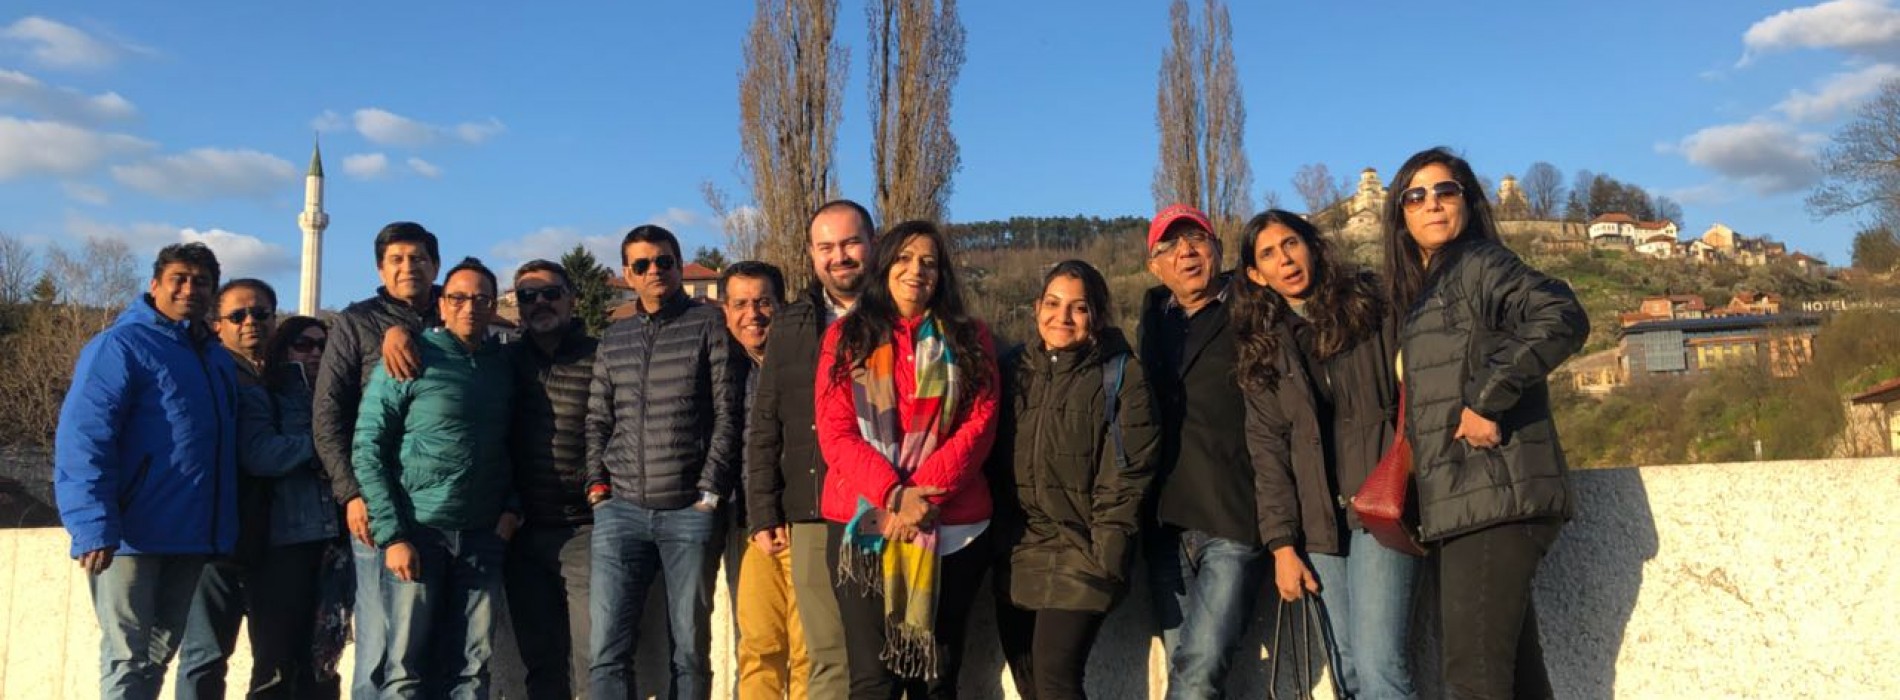 Nijhawan Group with Turkish Airlines conducts a FAM Trip to Bosnia and Herzegovina